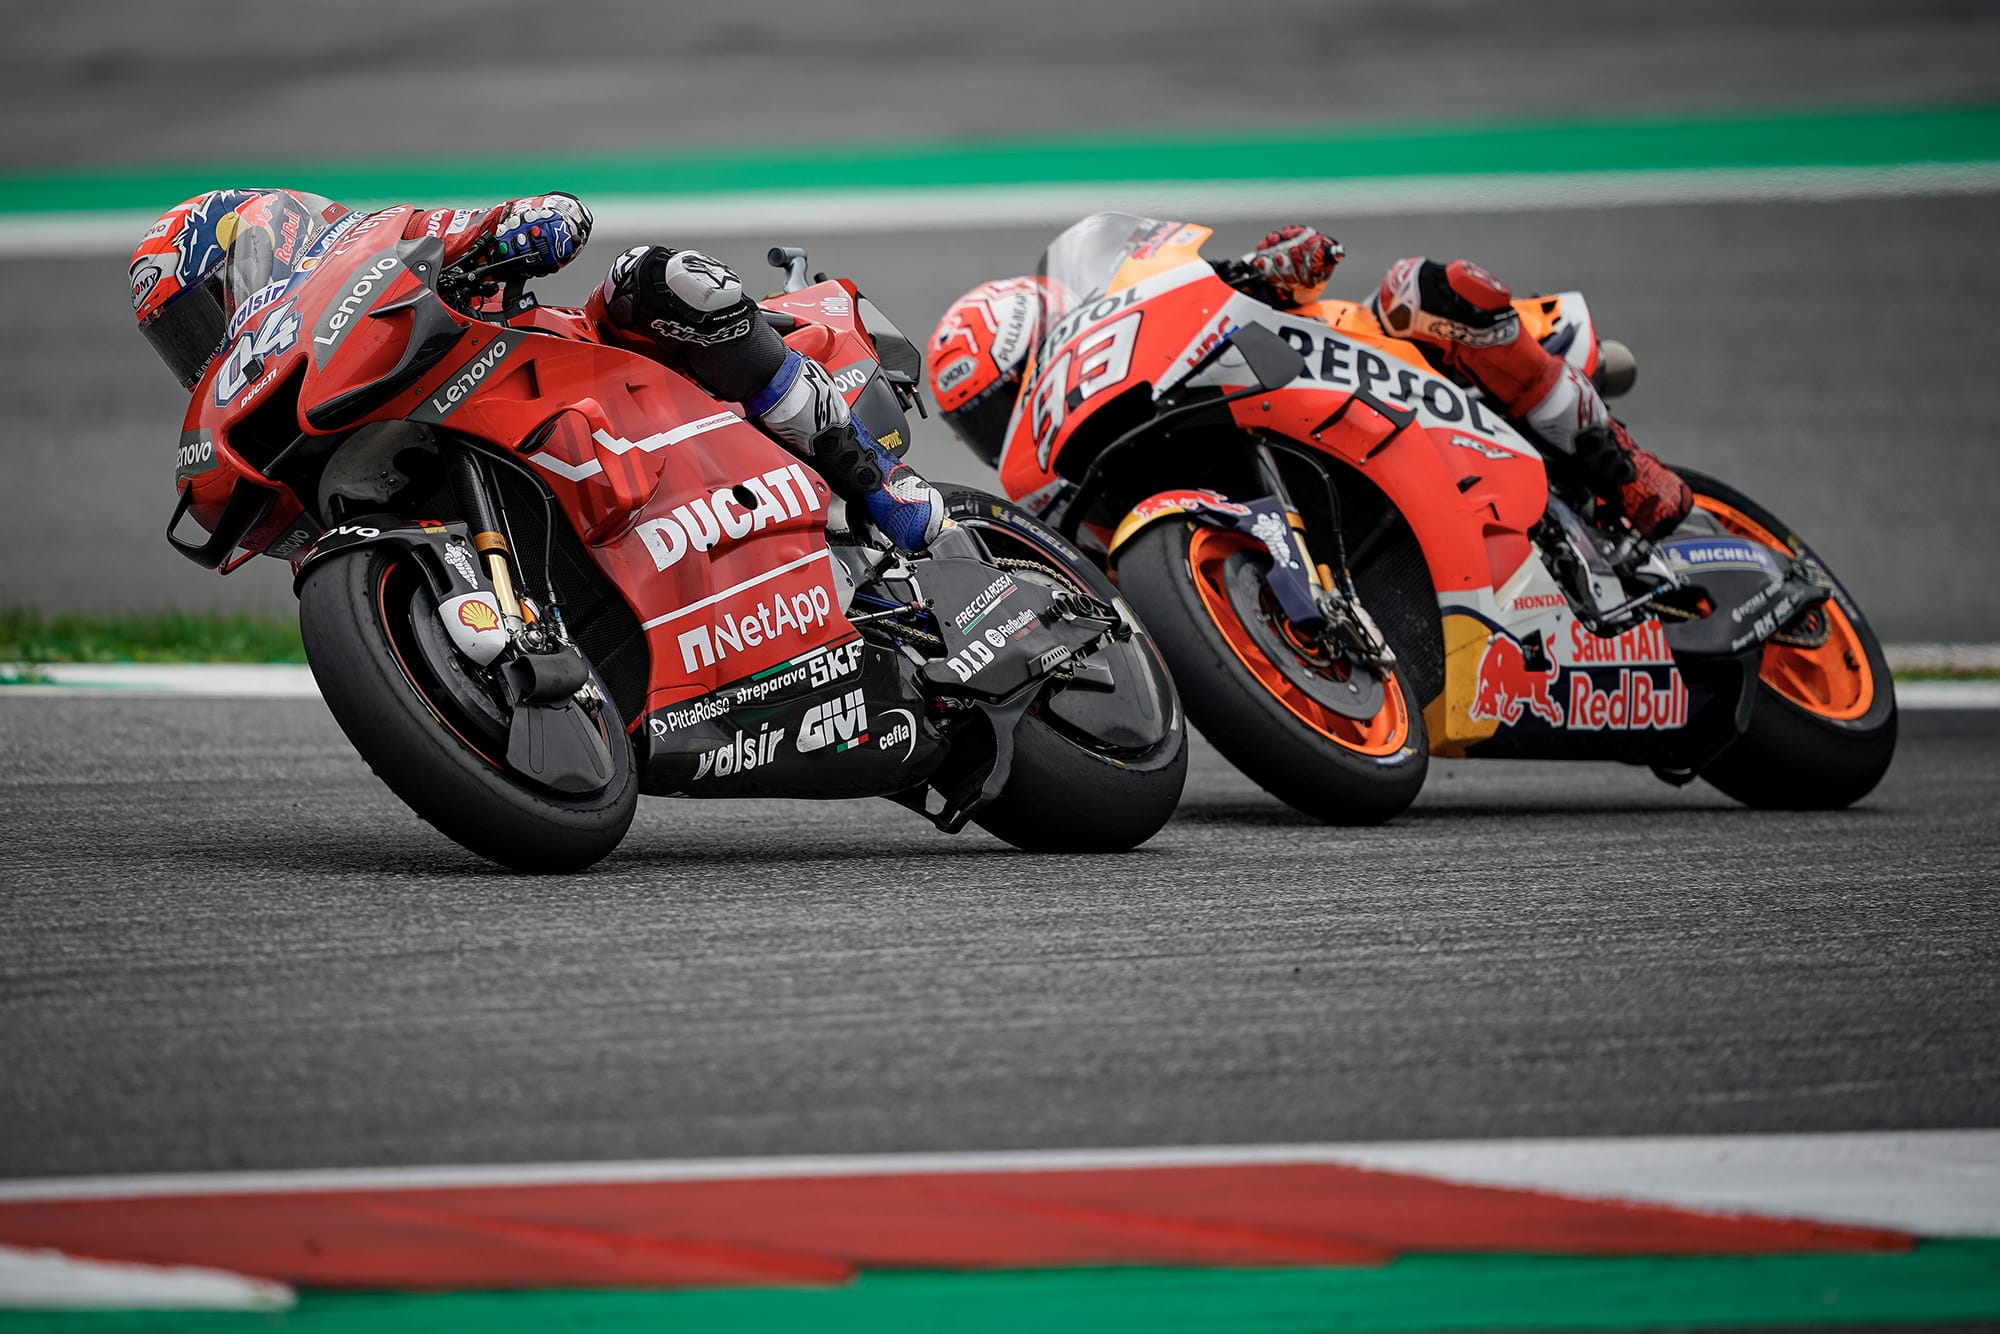 Dovizioso ahead of Marc Marquez in 2019 at the Red Bull Ring